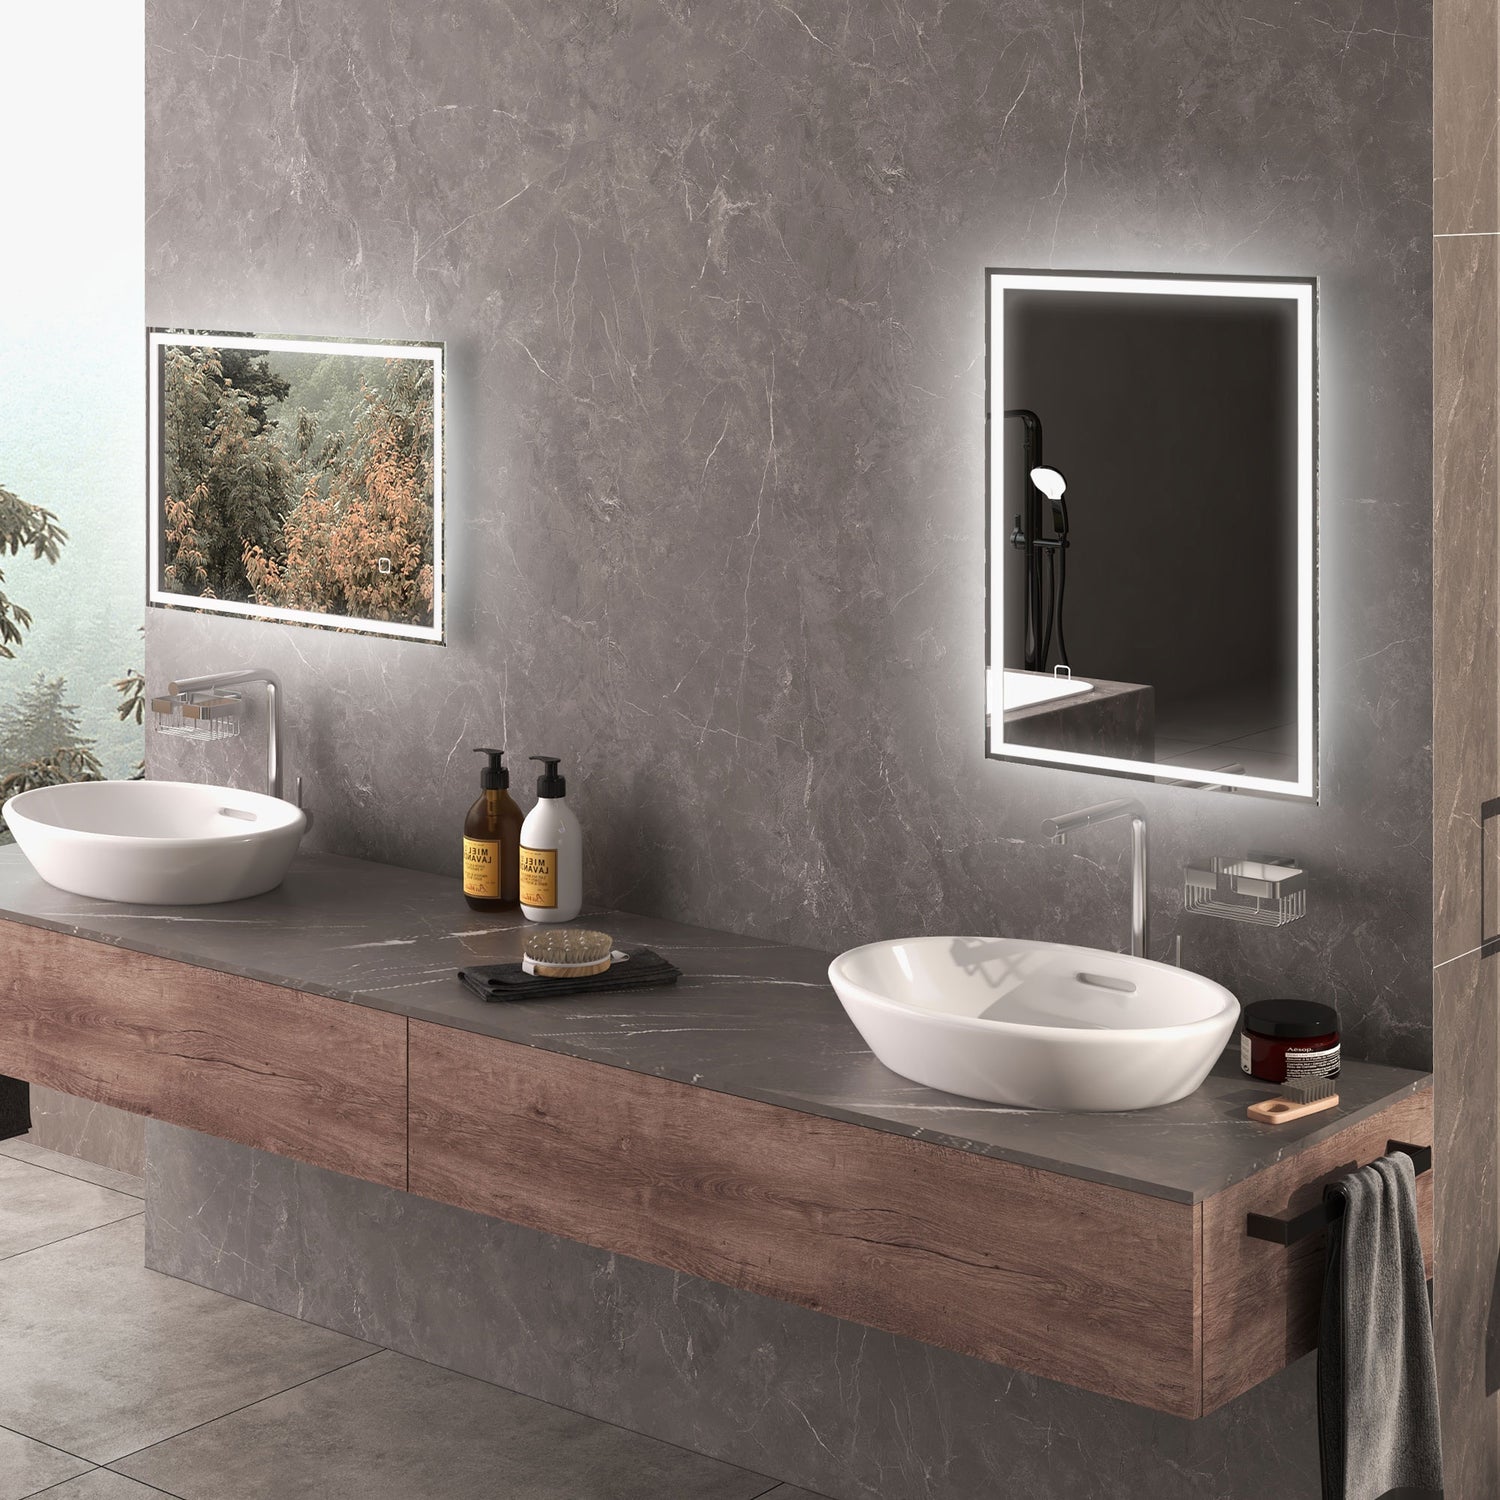 800x600mm LED Bathroom Mirror with Anti-fog Function, Touch Sensor Switch,  Cool White Lighting Vertical & Horizontal